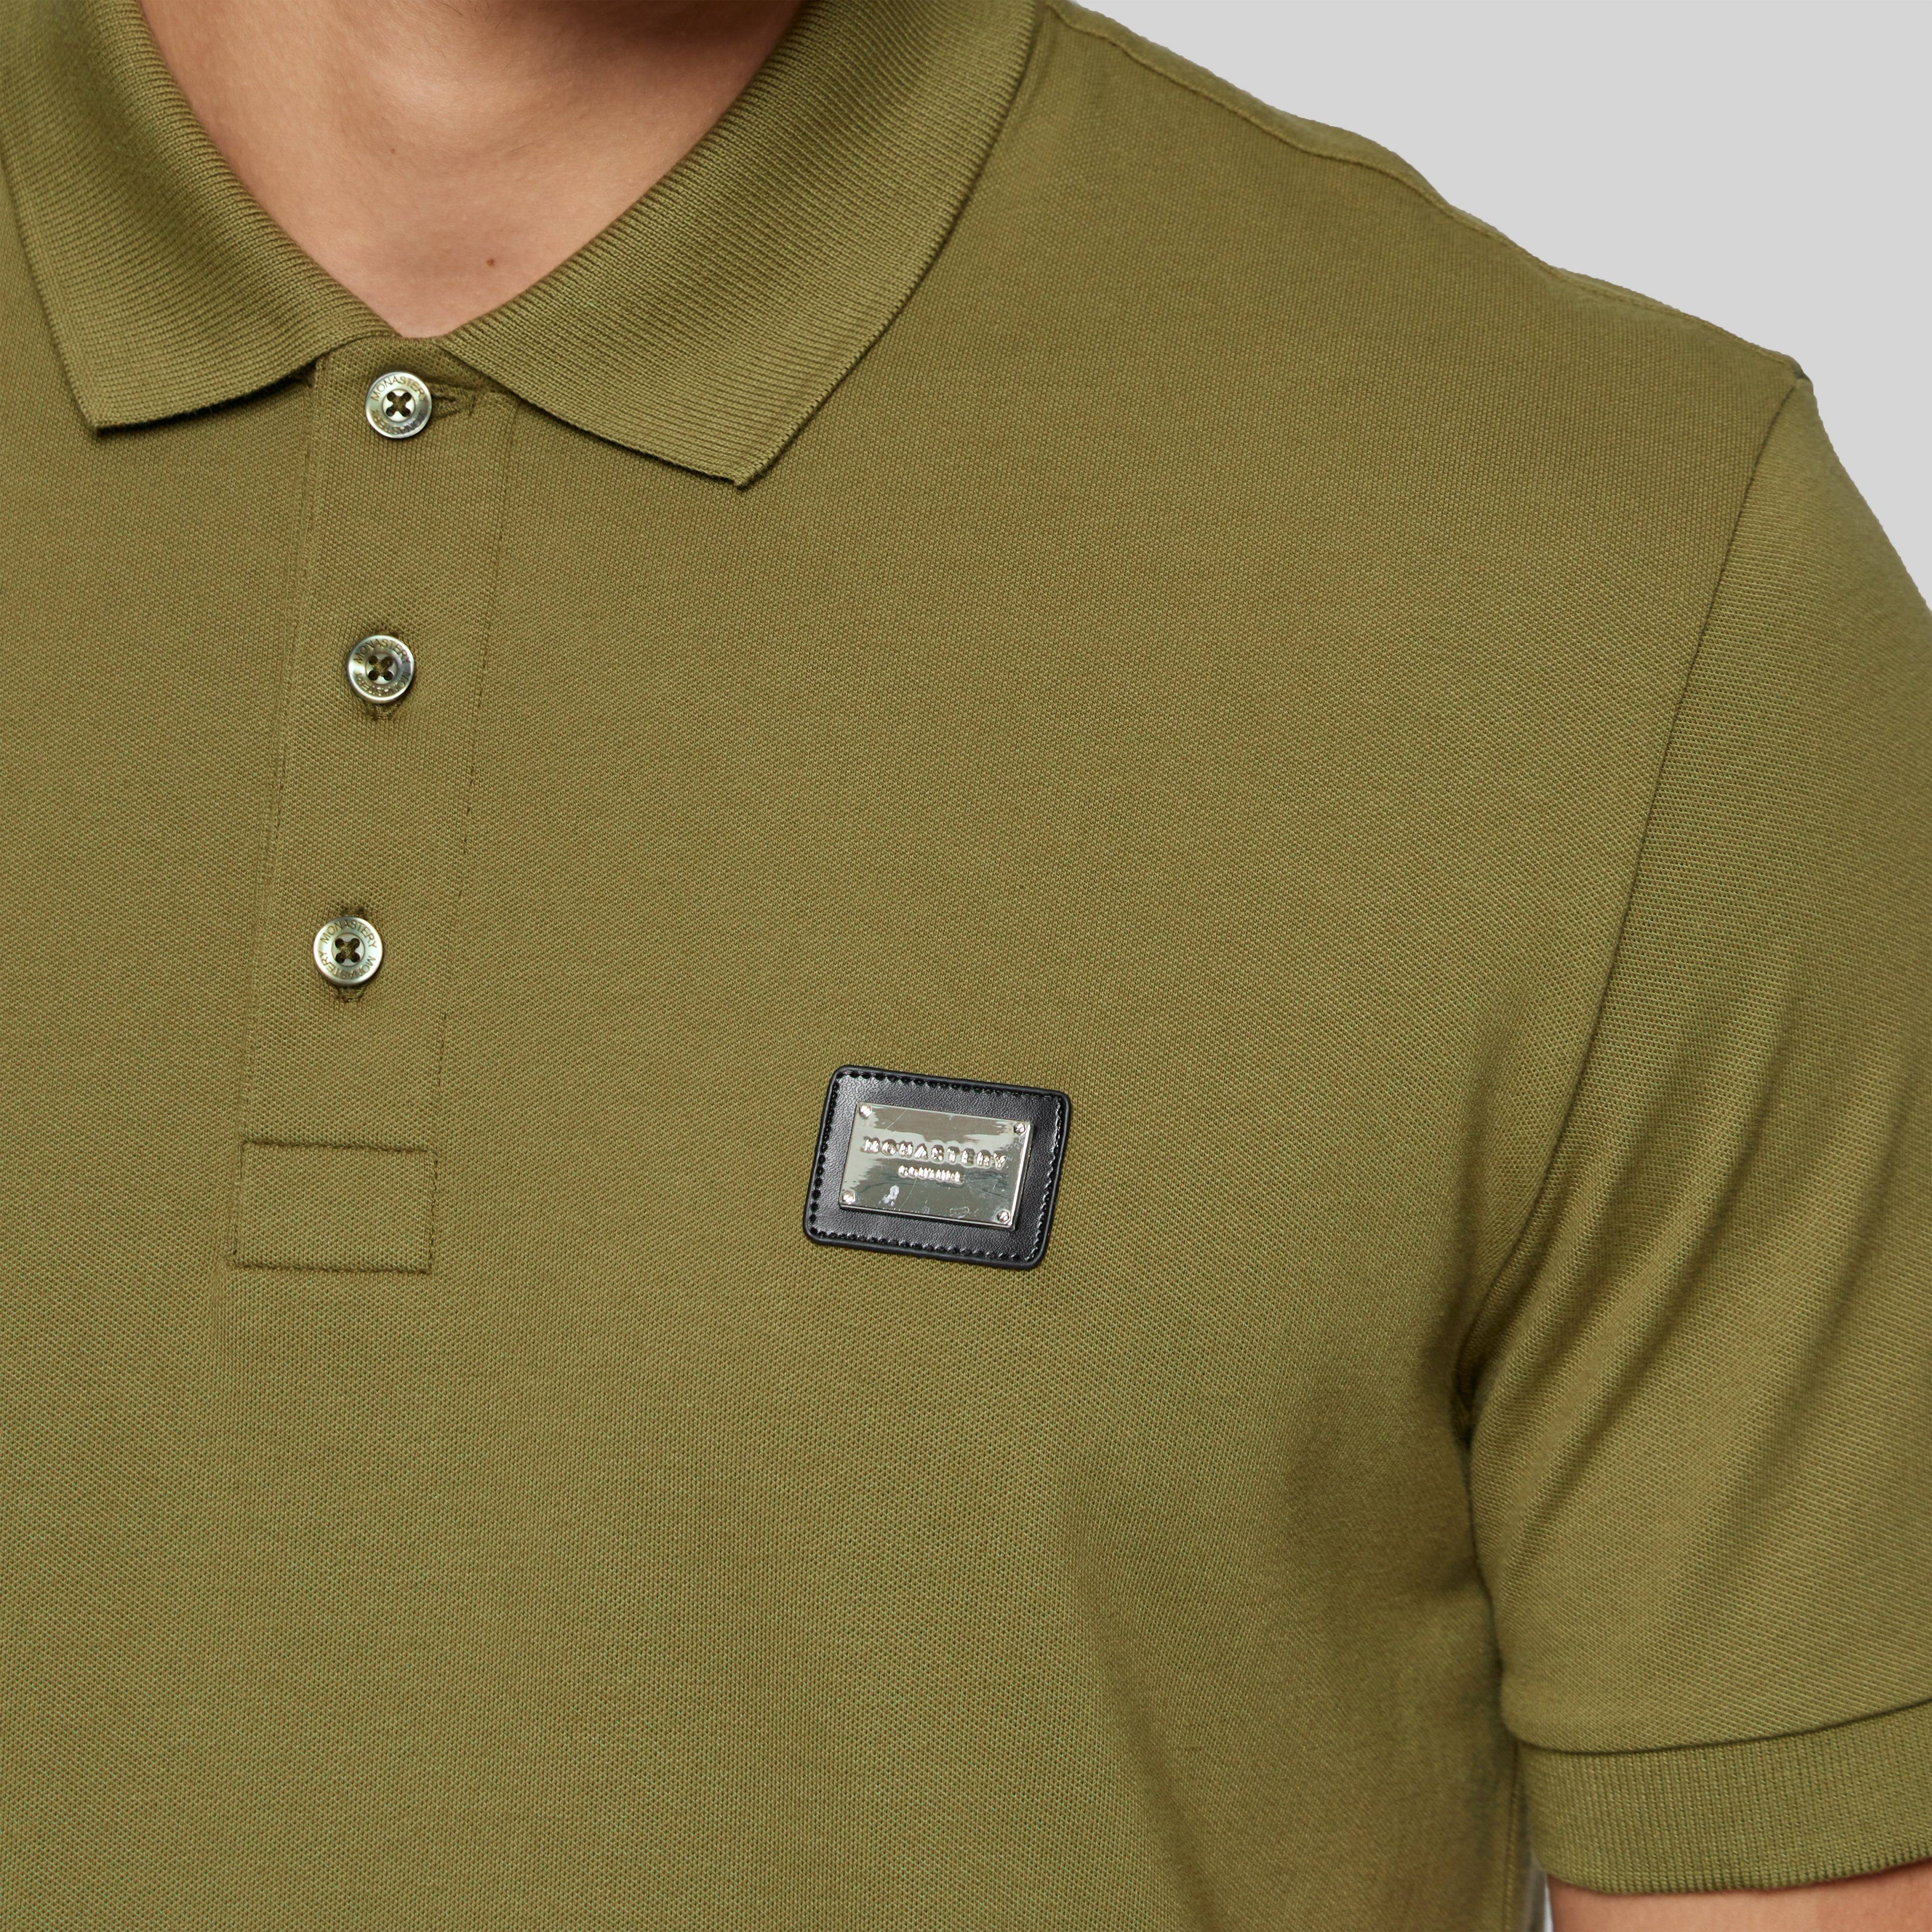 ECTRA OLIVE POLO | Monastery Couture